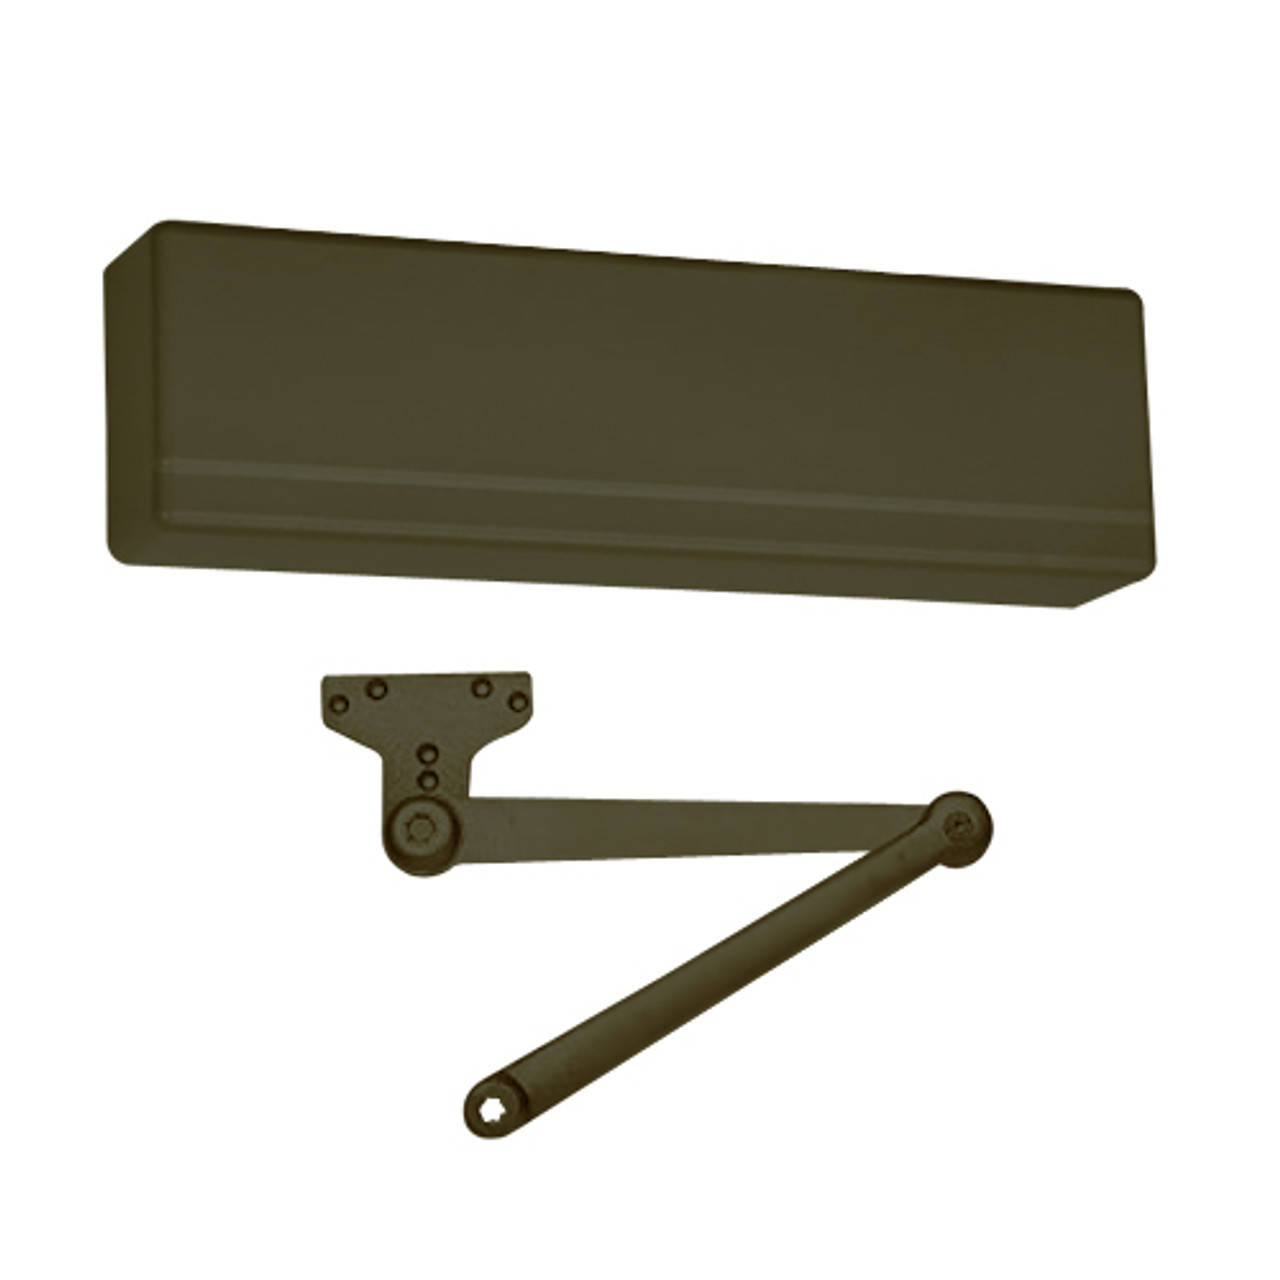 351-PH10-EB-LH Sargent 351 Series Powerglide Door Closer with Heavy Duty Friction Hold Open Parallel Arm in Bronze Powder Coat